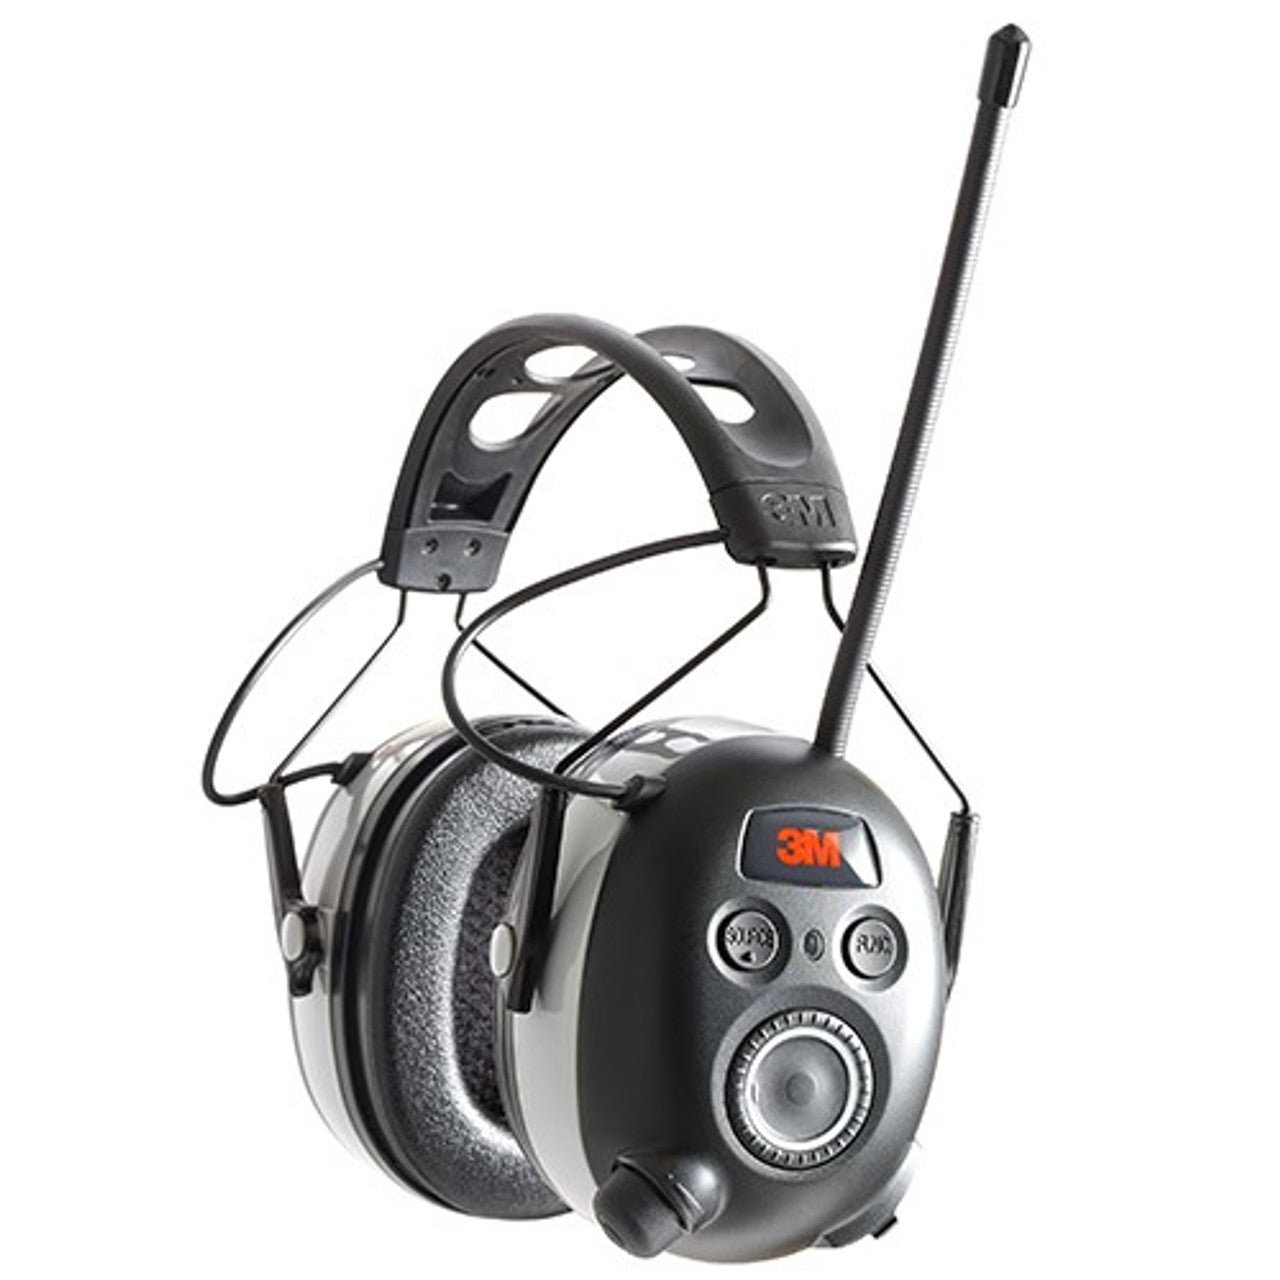 3M Pro Series WorkTunes™ Wireless Bluetooth Earmuff with AM/FM, Call  Connect Streaming (SLC80 27.9dB, Class 5) Earjobs